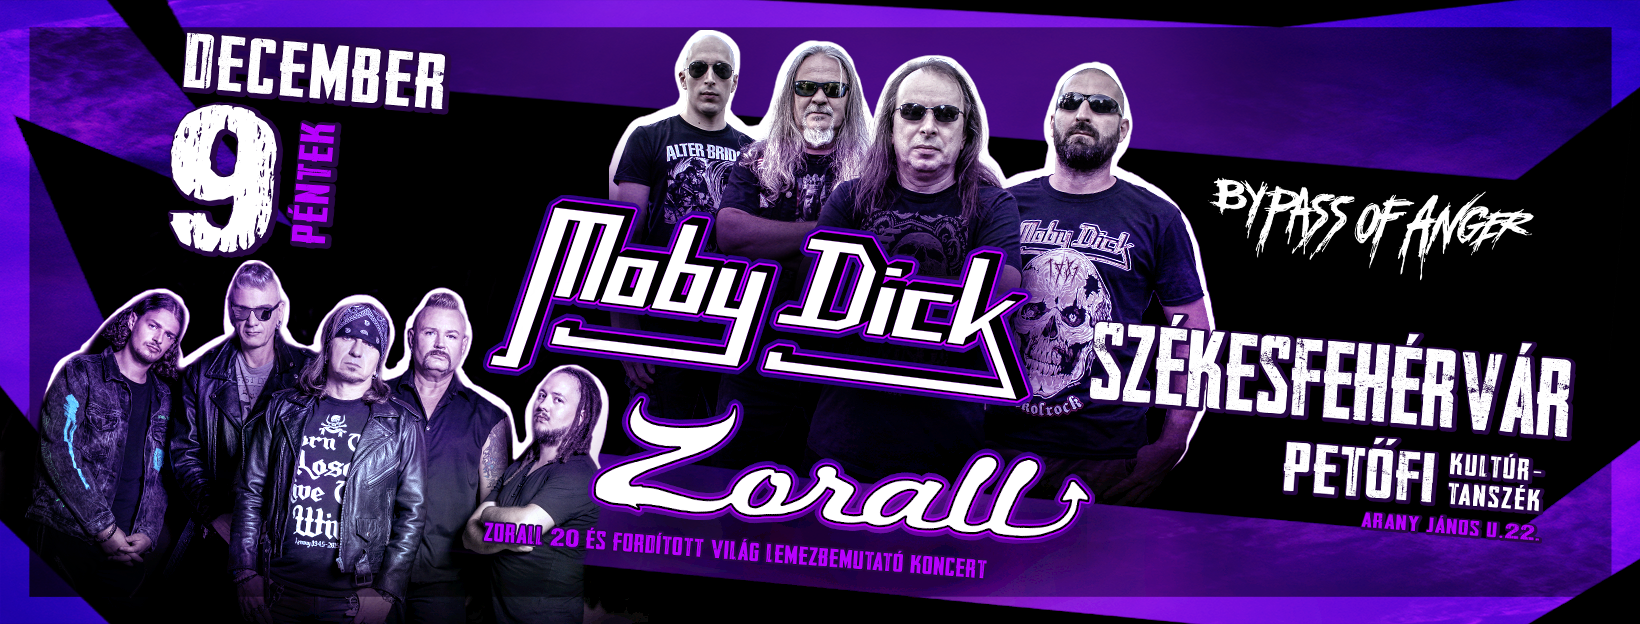 MOBY DICK x ZORALL vendég: Bypass of Anger